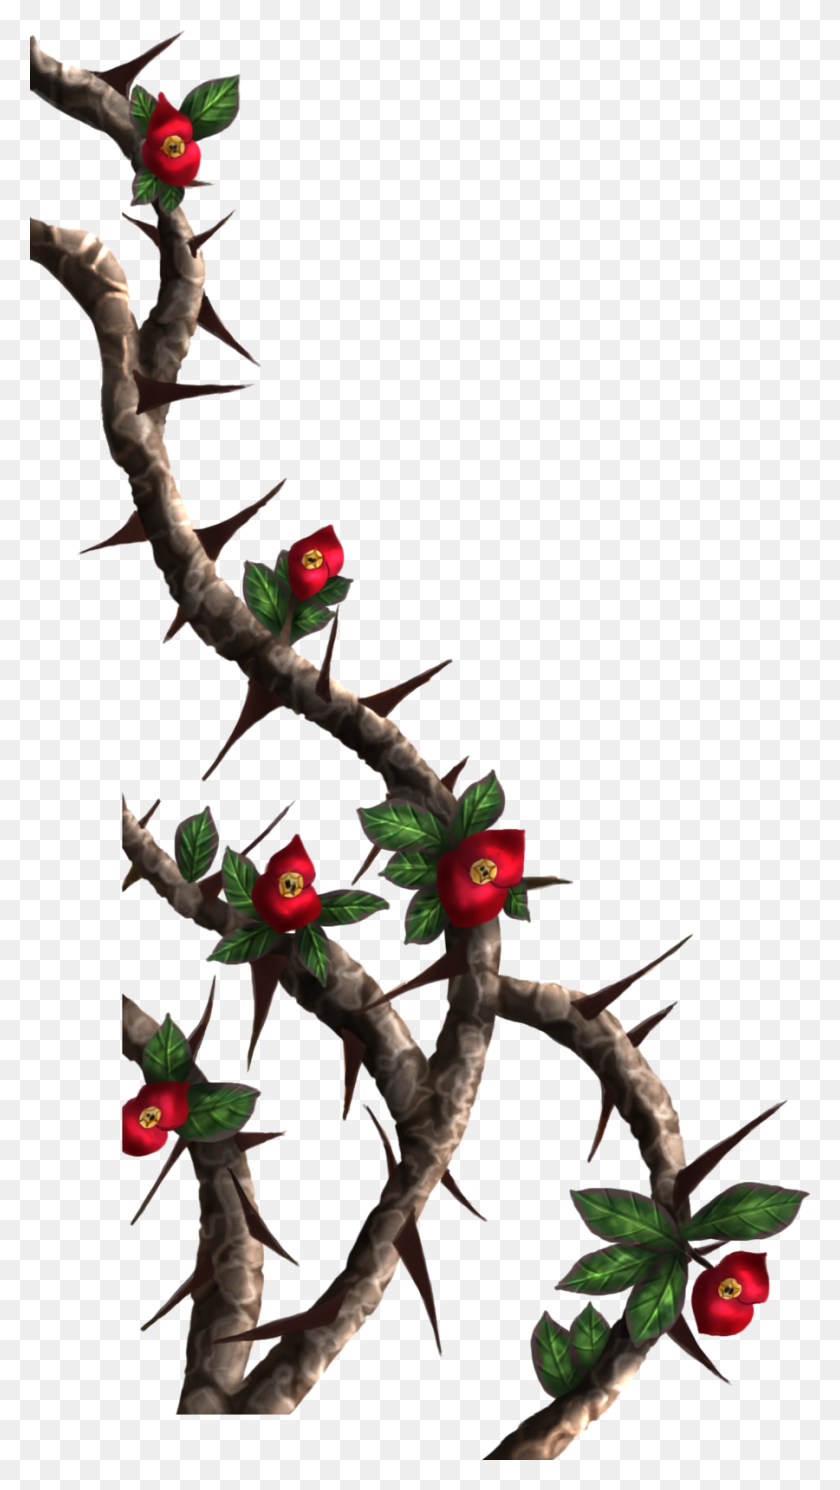 900x1650 Thorny Vines Png Png Image - Vines PNG